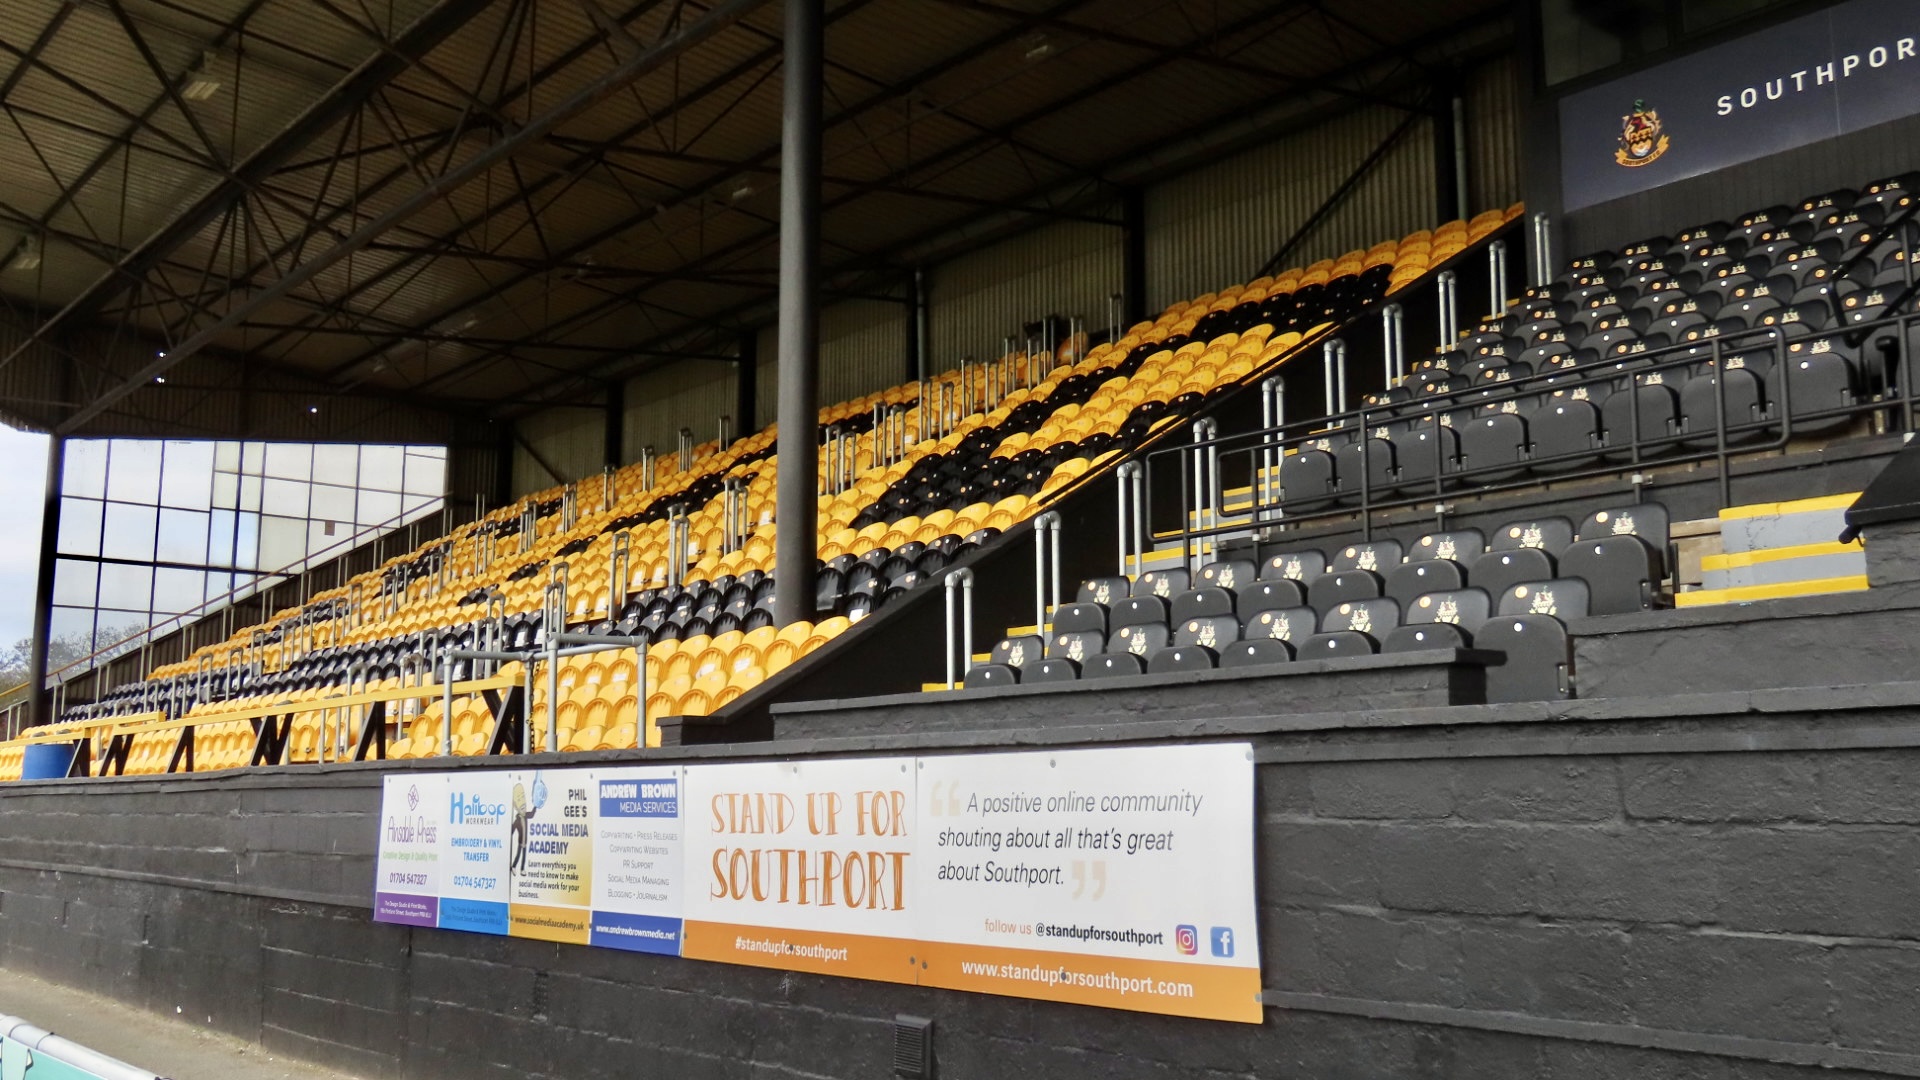 The Stand Up For Southport board at Southport FC